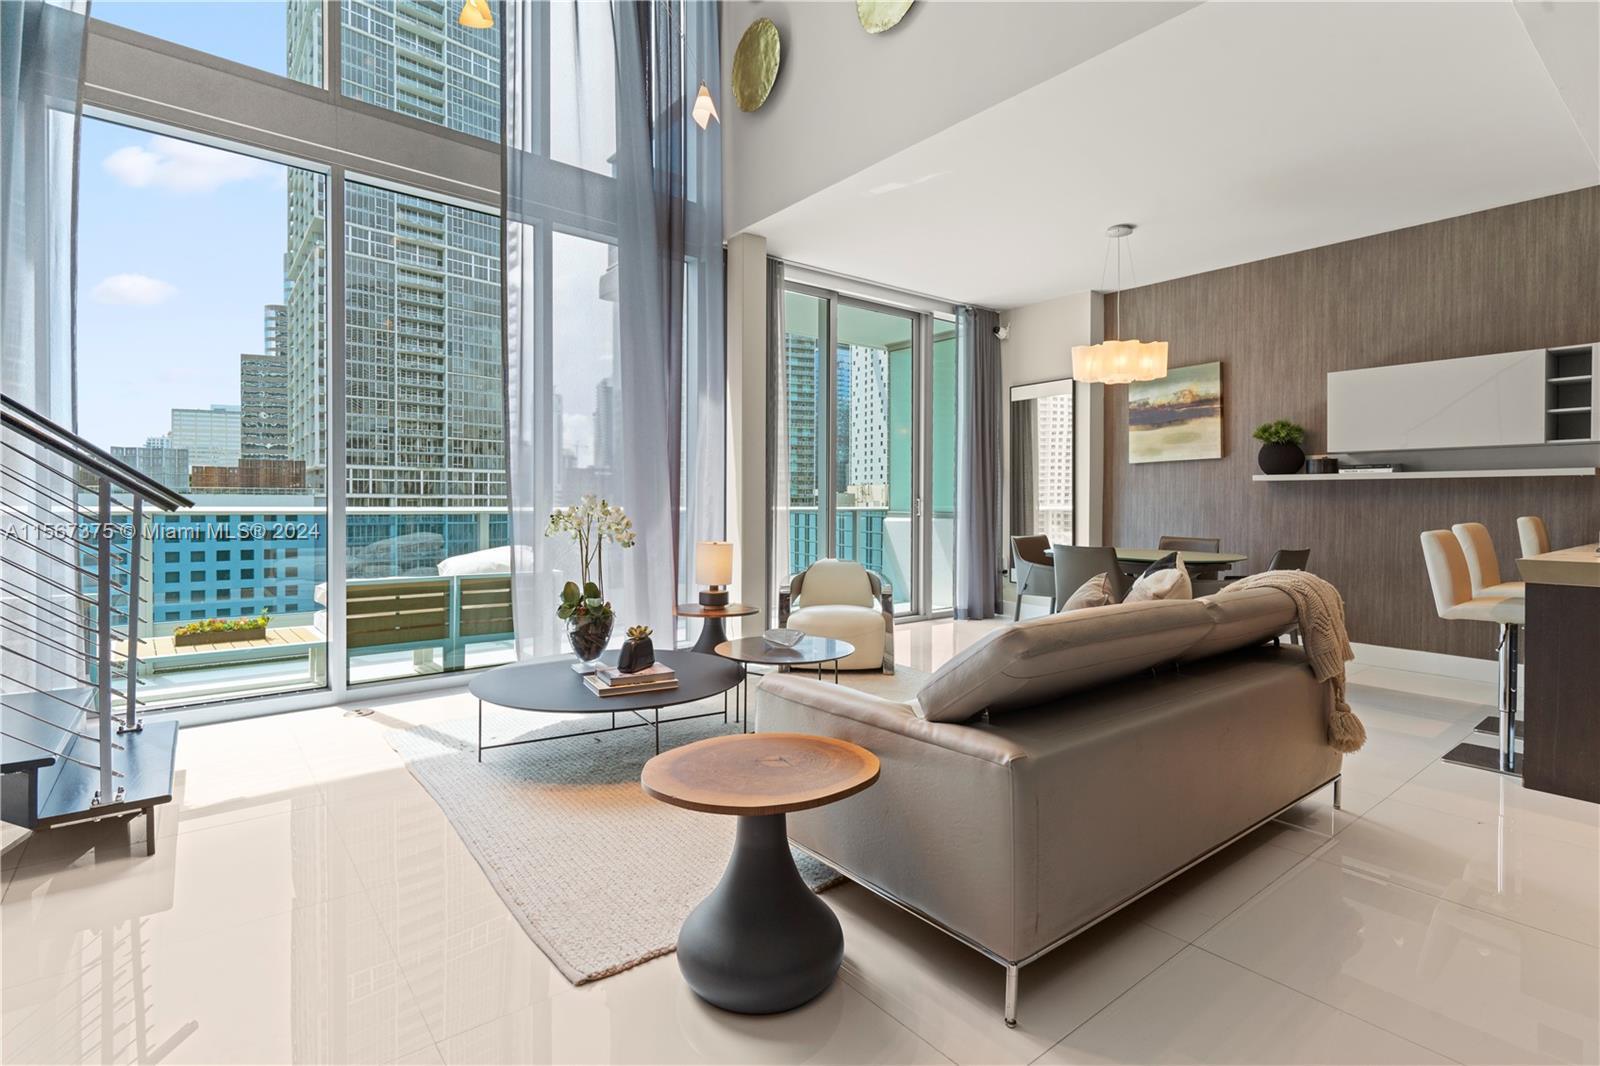 Welcome to luxury living, this modern 2-bedroom, 2.5-bathroom offers 1574 square feet of sophisticat